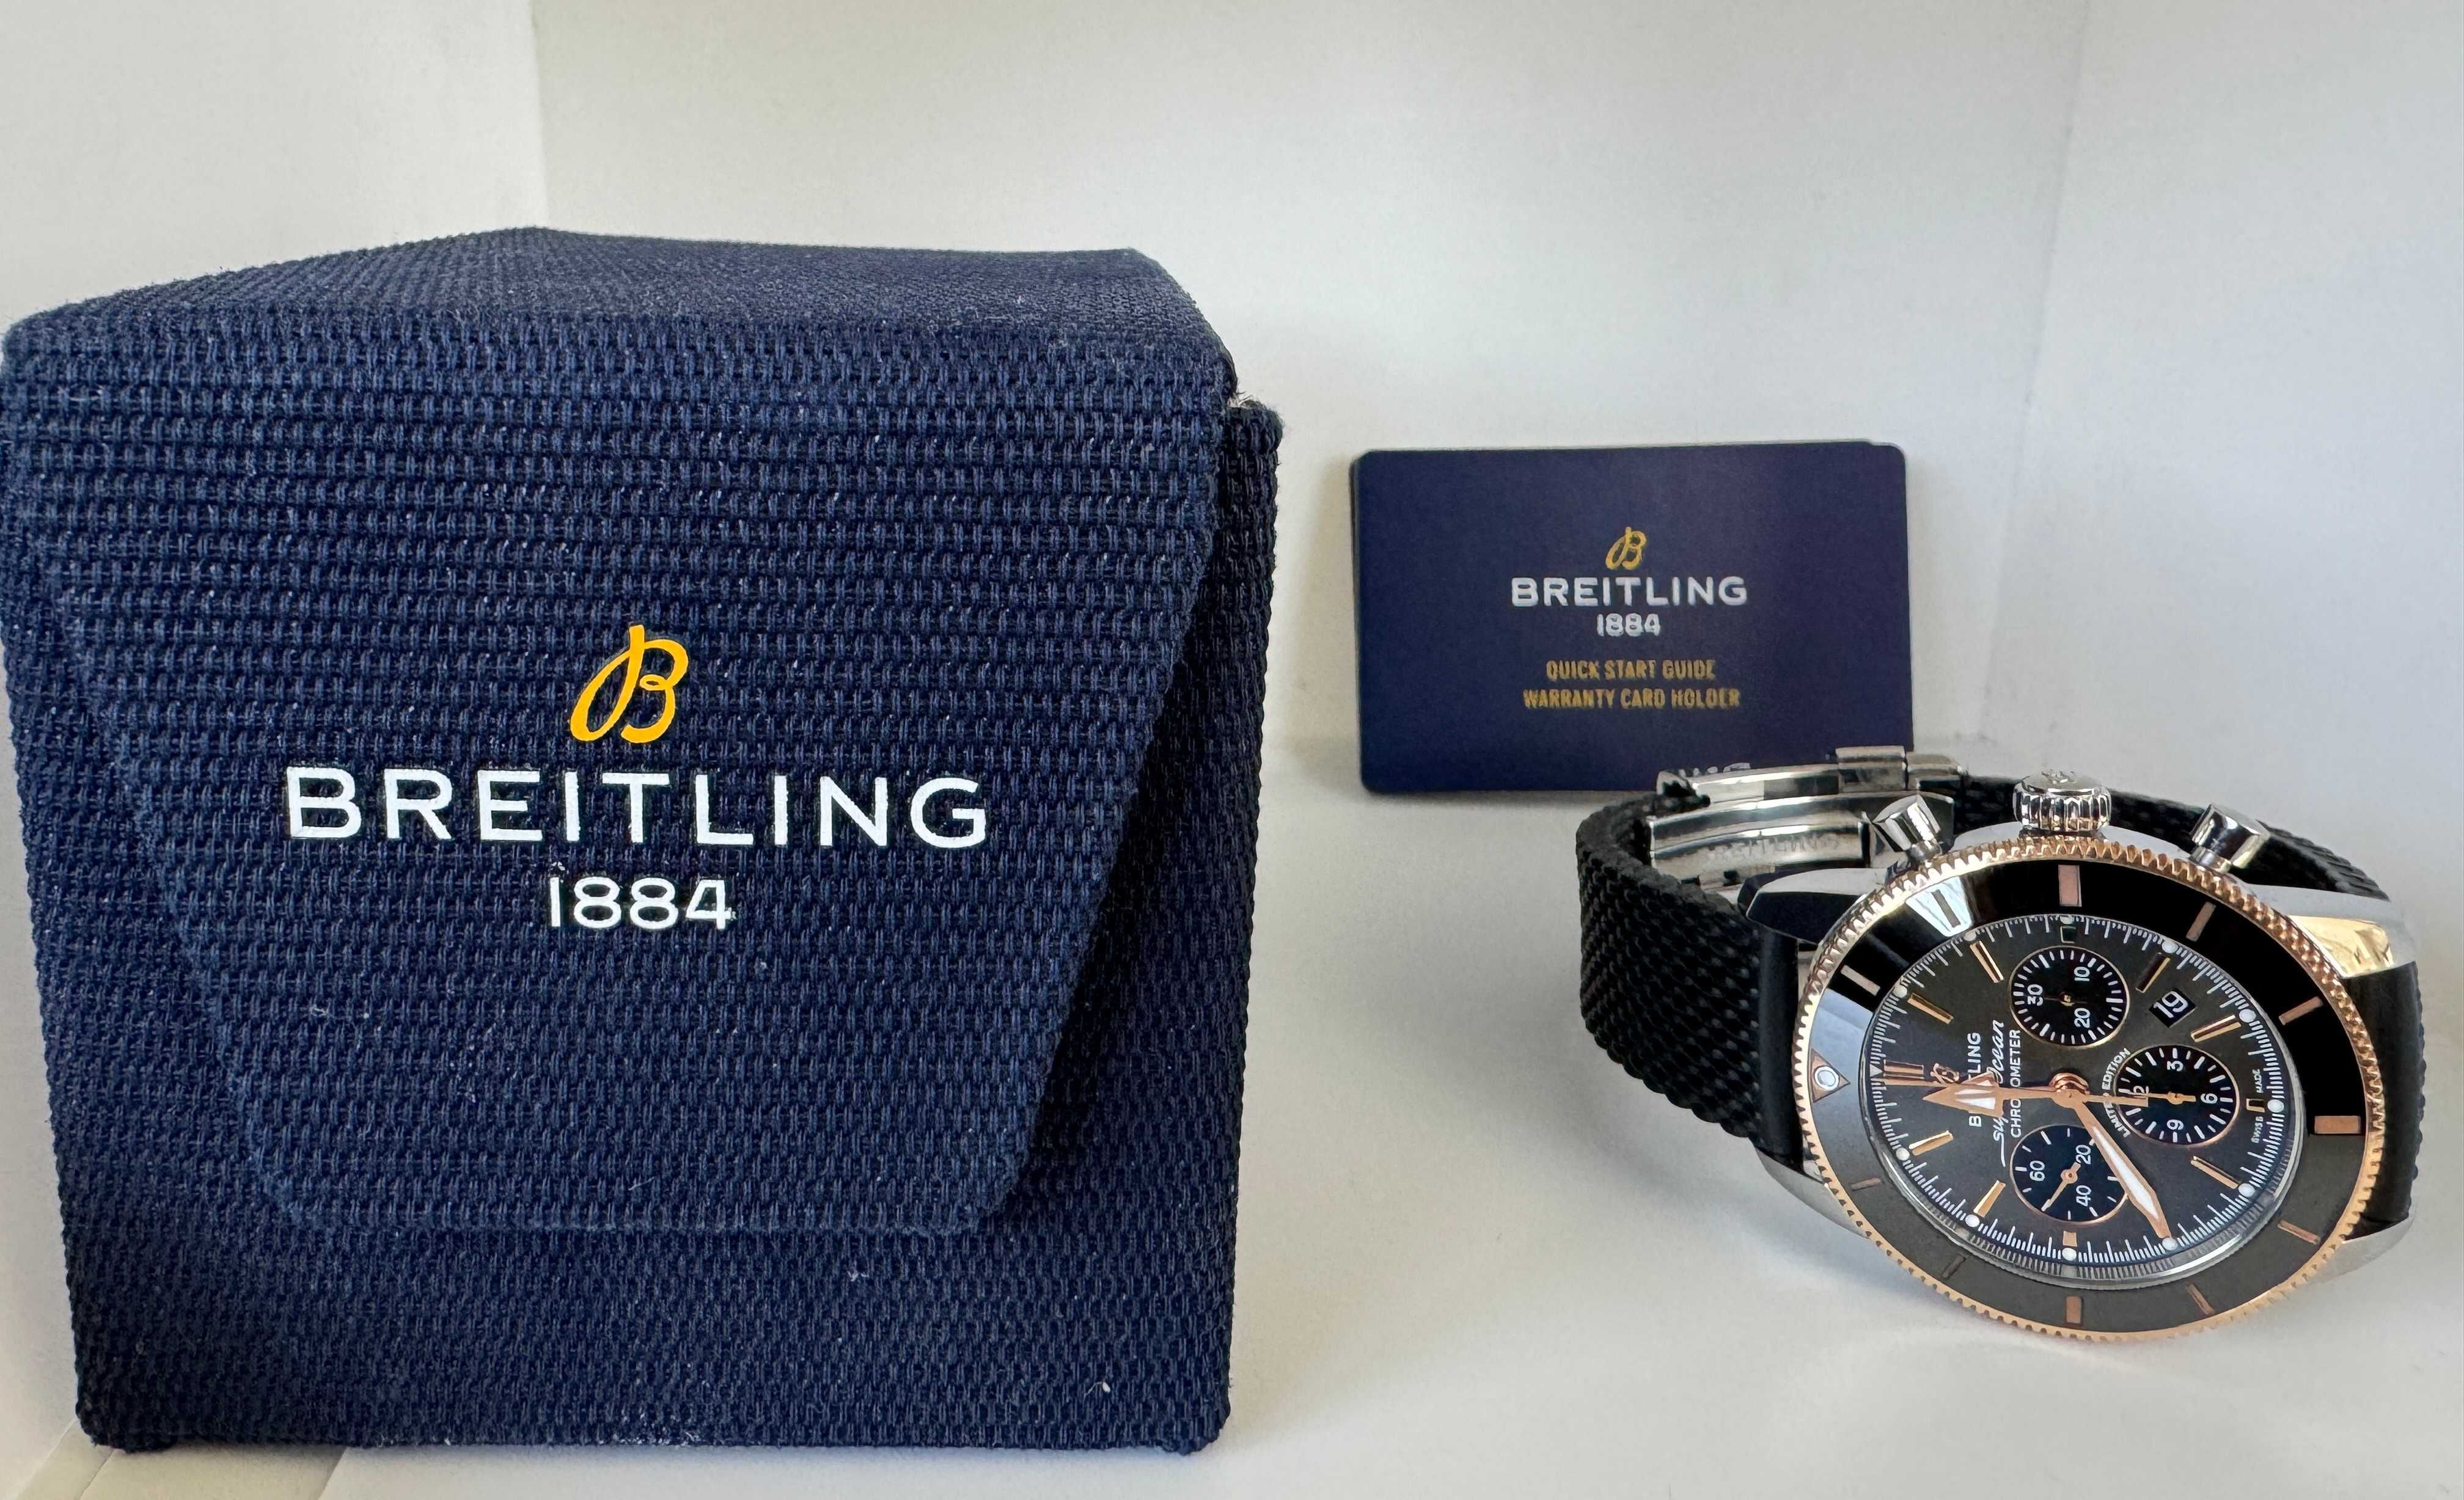 Breitling Superocean Heritage B01 Chronograph 44 Limited Edition